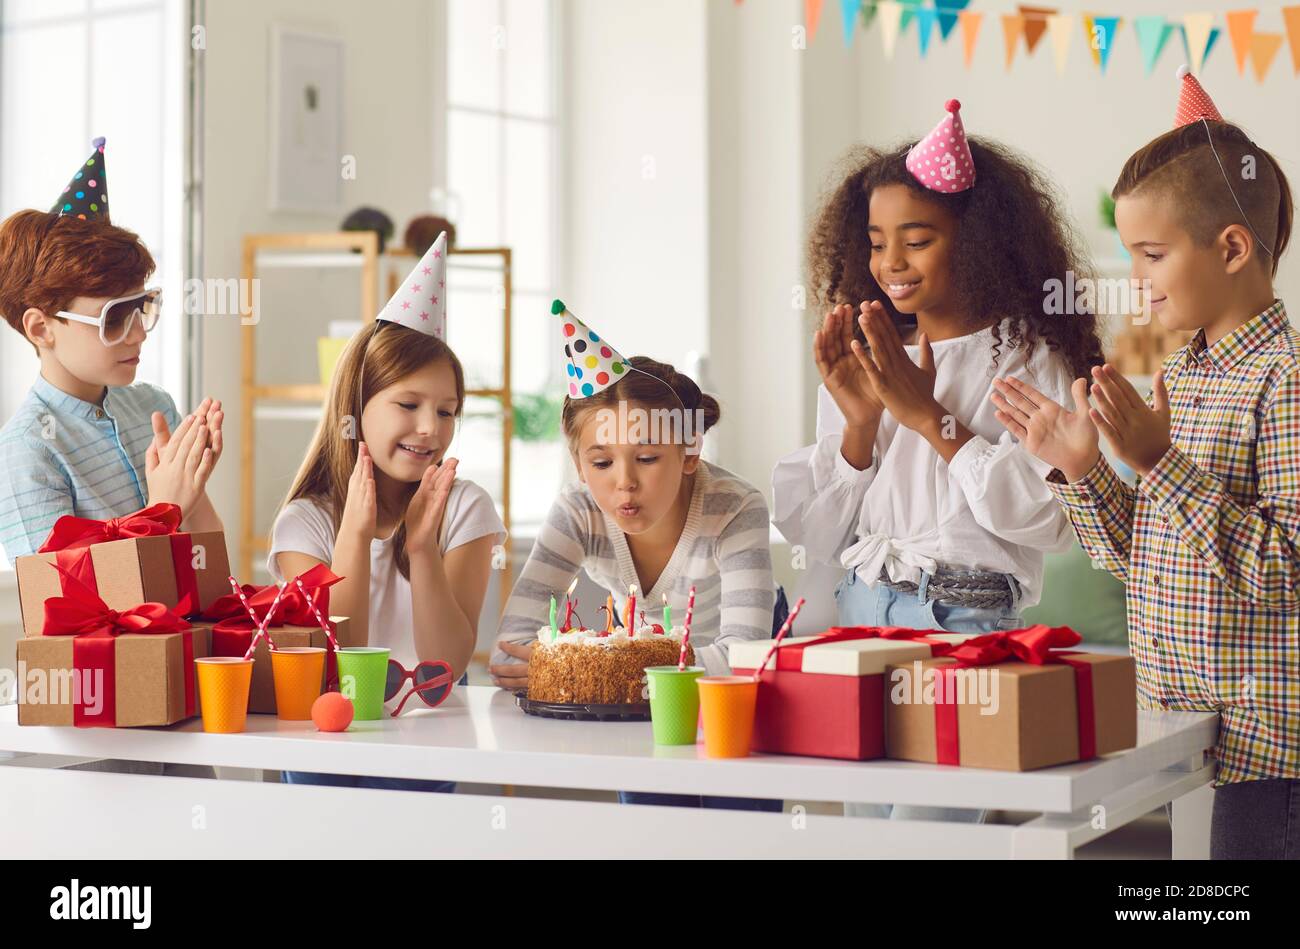 Little birthday girl blows out candles on a cake to the applause of her international friends. Stock Photo